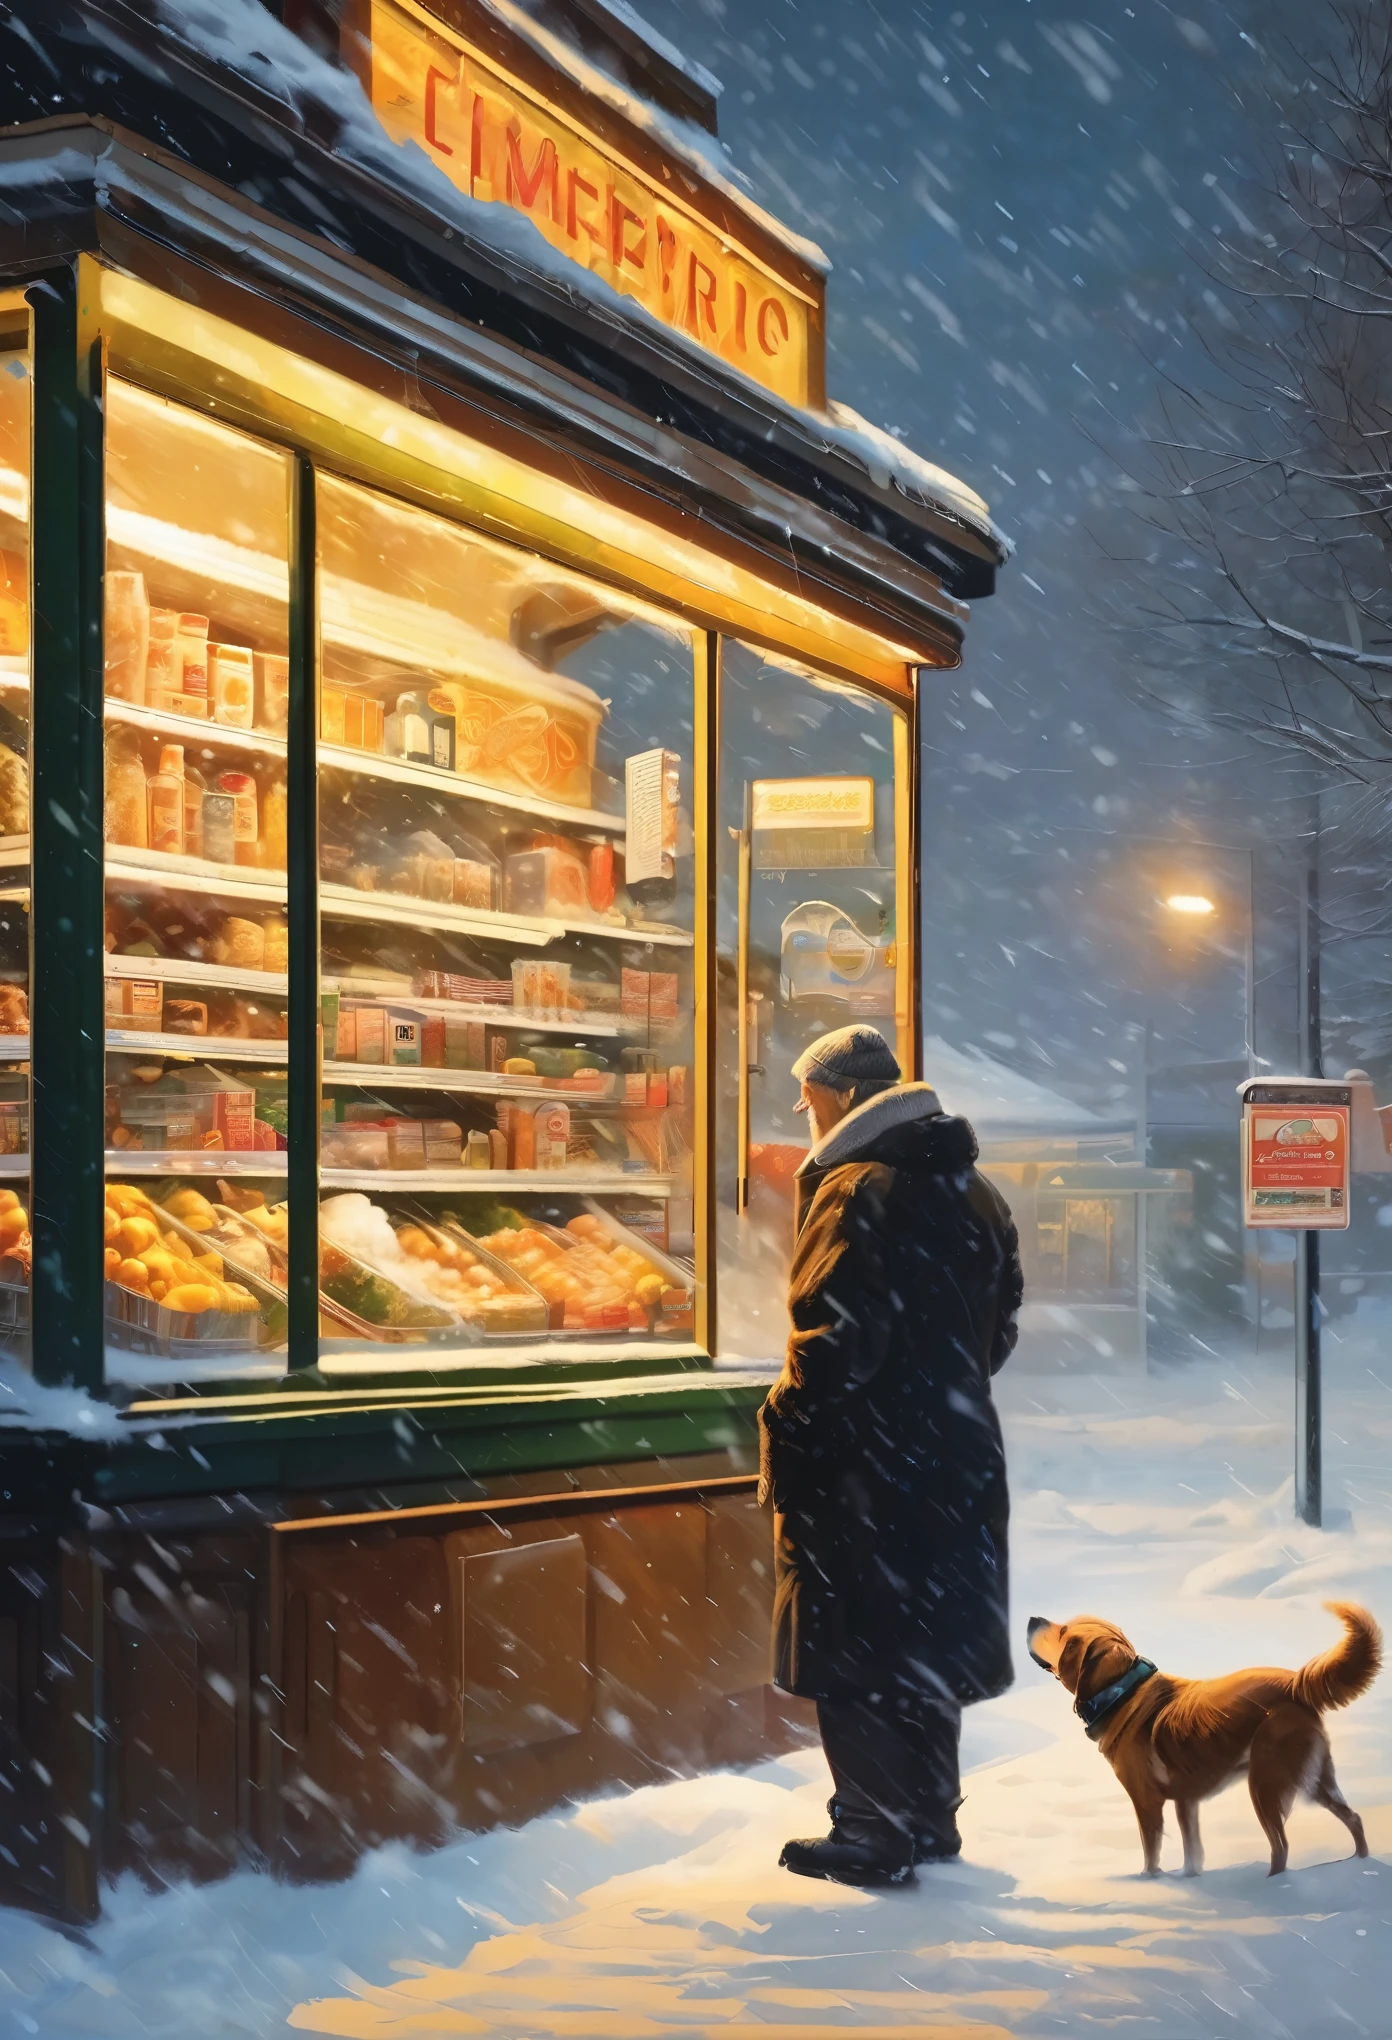 （masterpiece，photography，lifelike，）winter，heavy snow，snow，late night，Convenience store at night，supermarket，Huge glass windows，Old man and dog in the window，Bus stops